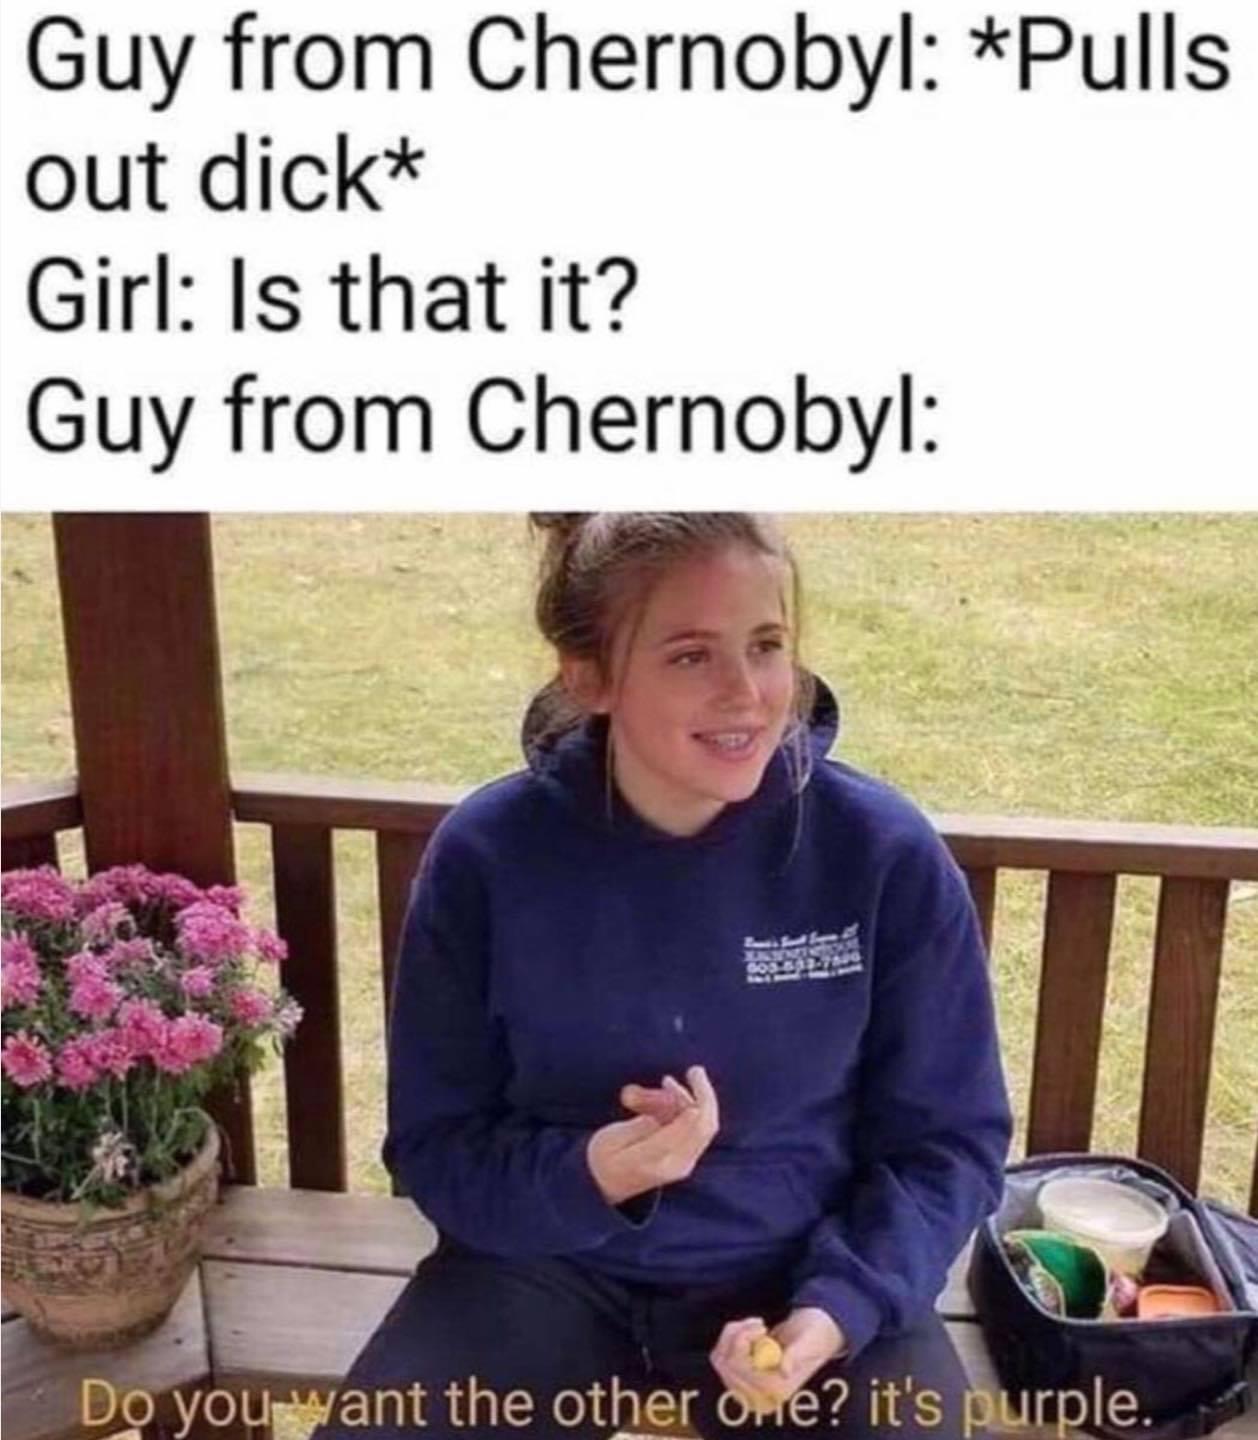 google chrome - Guy from Chernobyl Pulls out dick Girl Is that it? Guy from Chernobyl Antigo S21227130 Do you want the other one? it's purple.